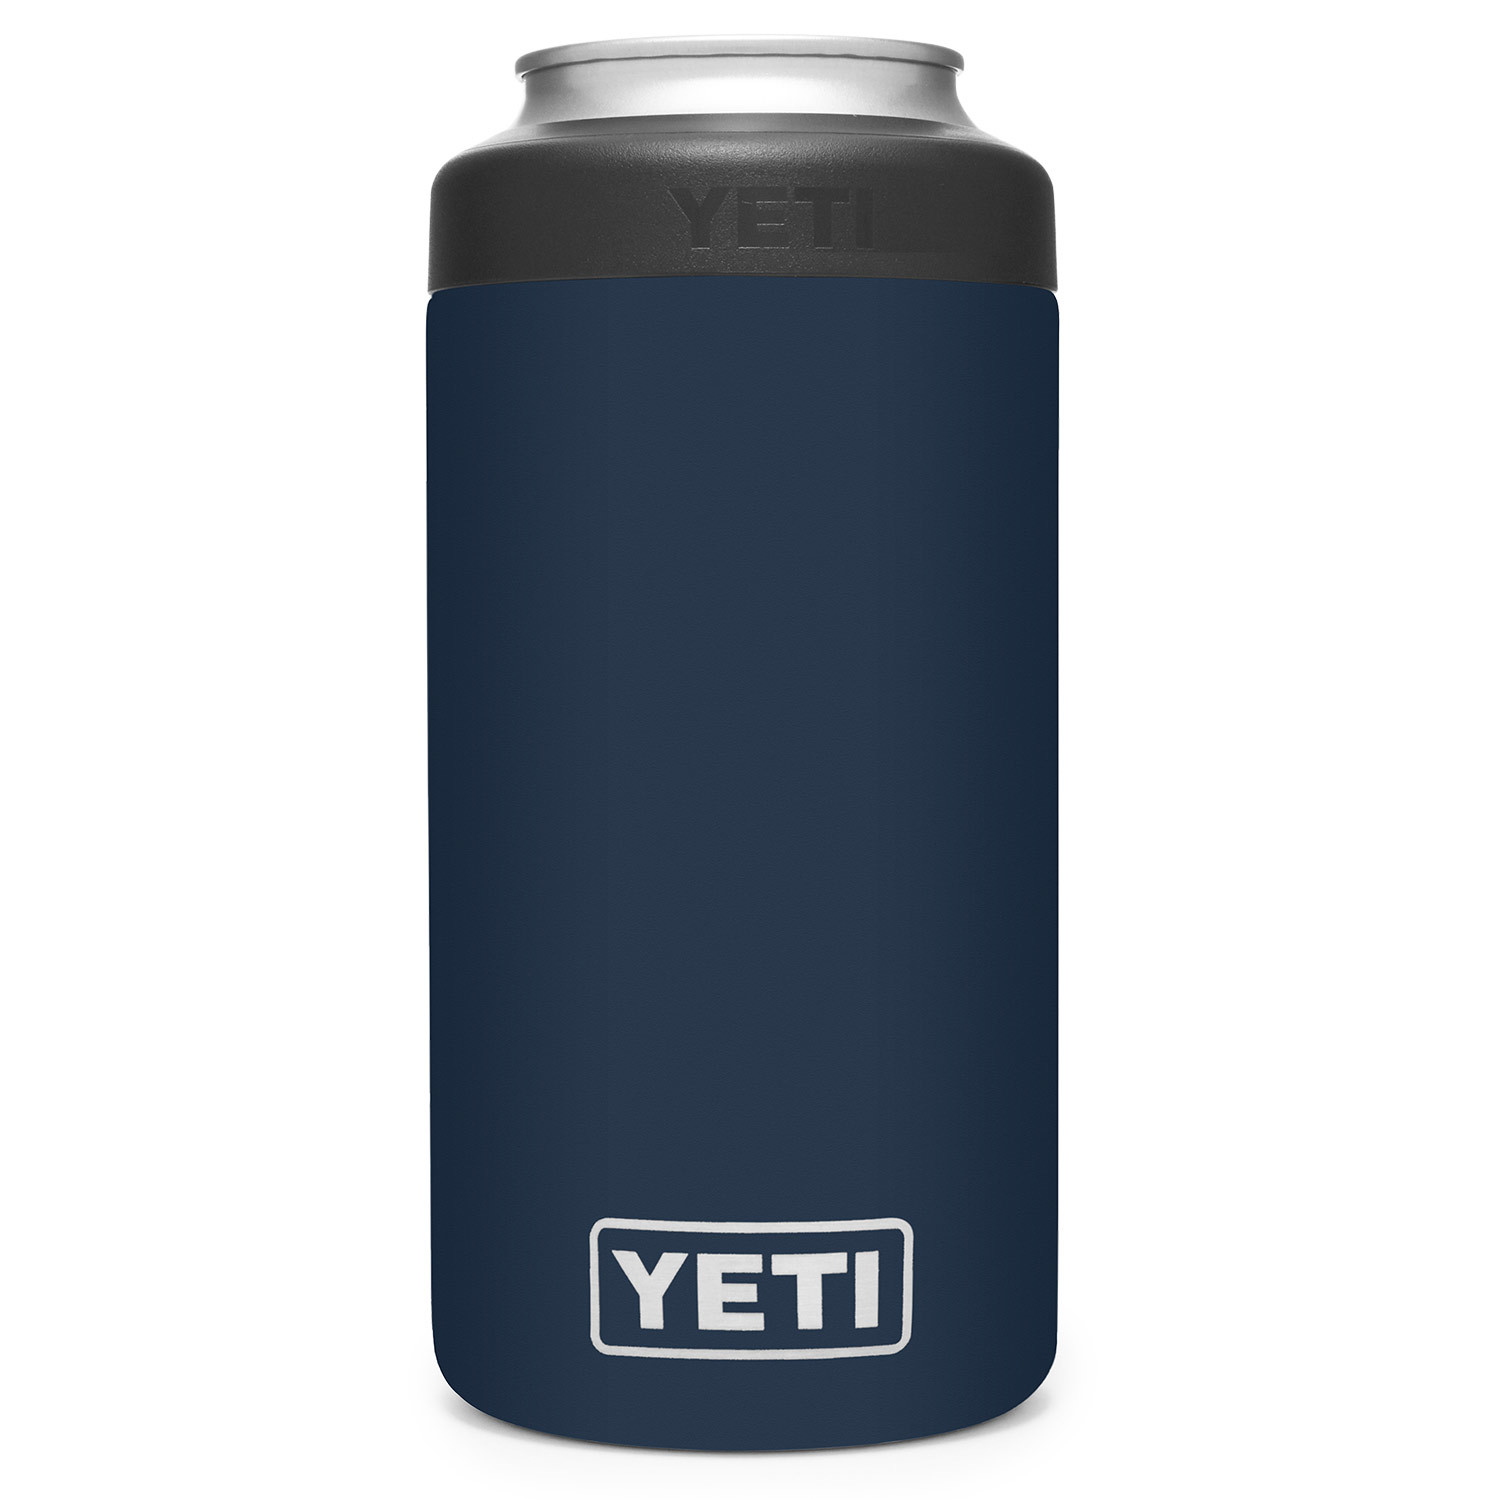 Yeti Hometown 10 Year Anniversary 16oz Colster Tall Can Cooler